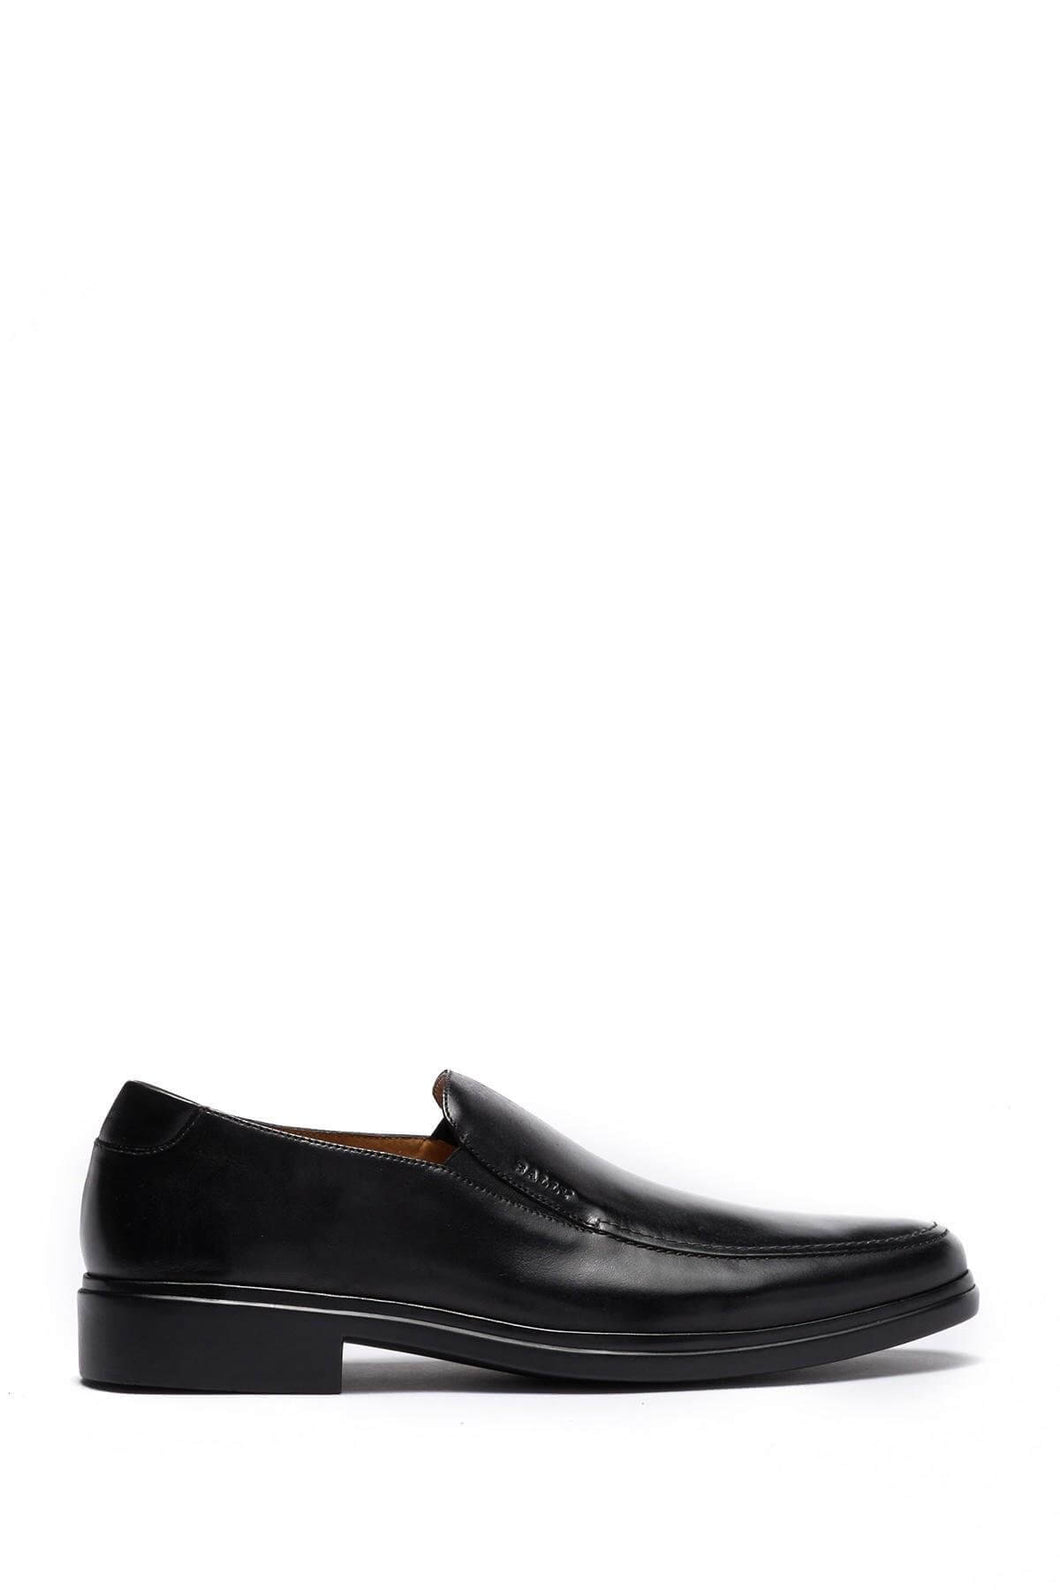 NEW Bally Caddo Men's 6189492 Black Plain Calf Leather Loafers US 12 MSRP $485